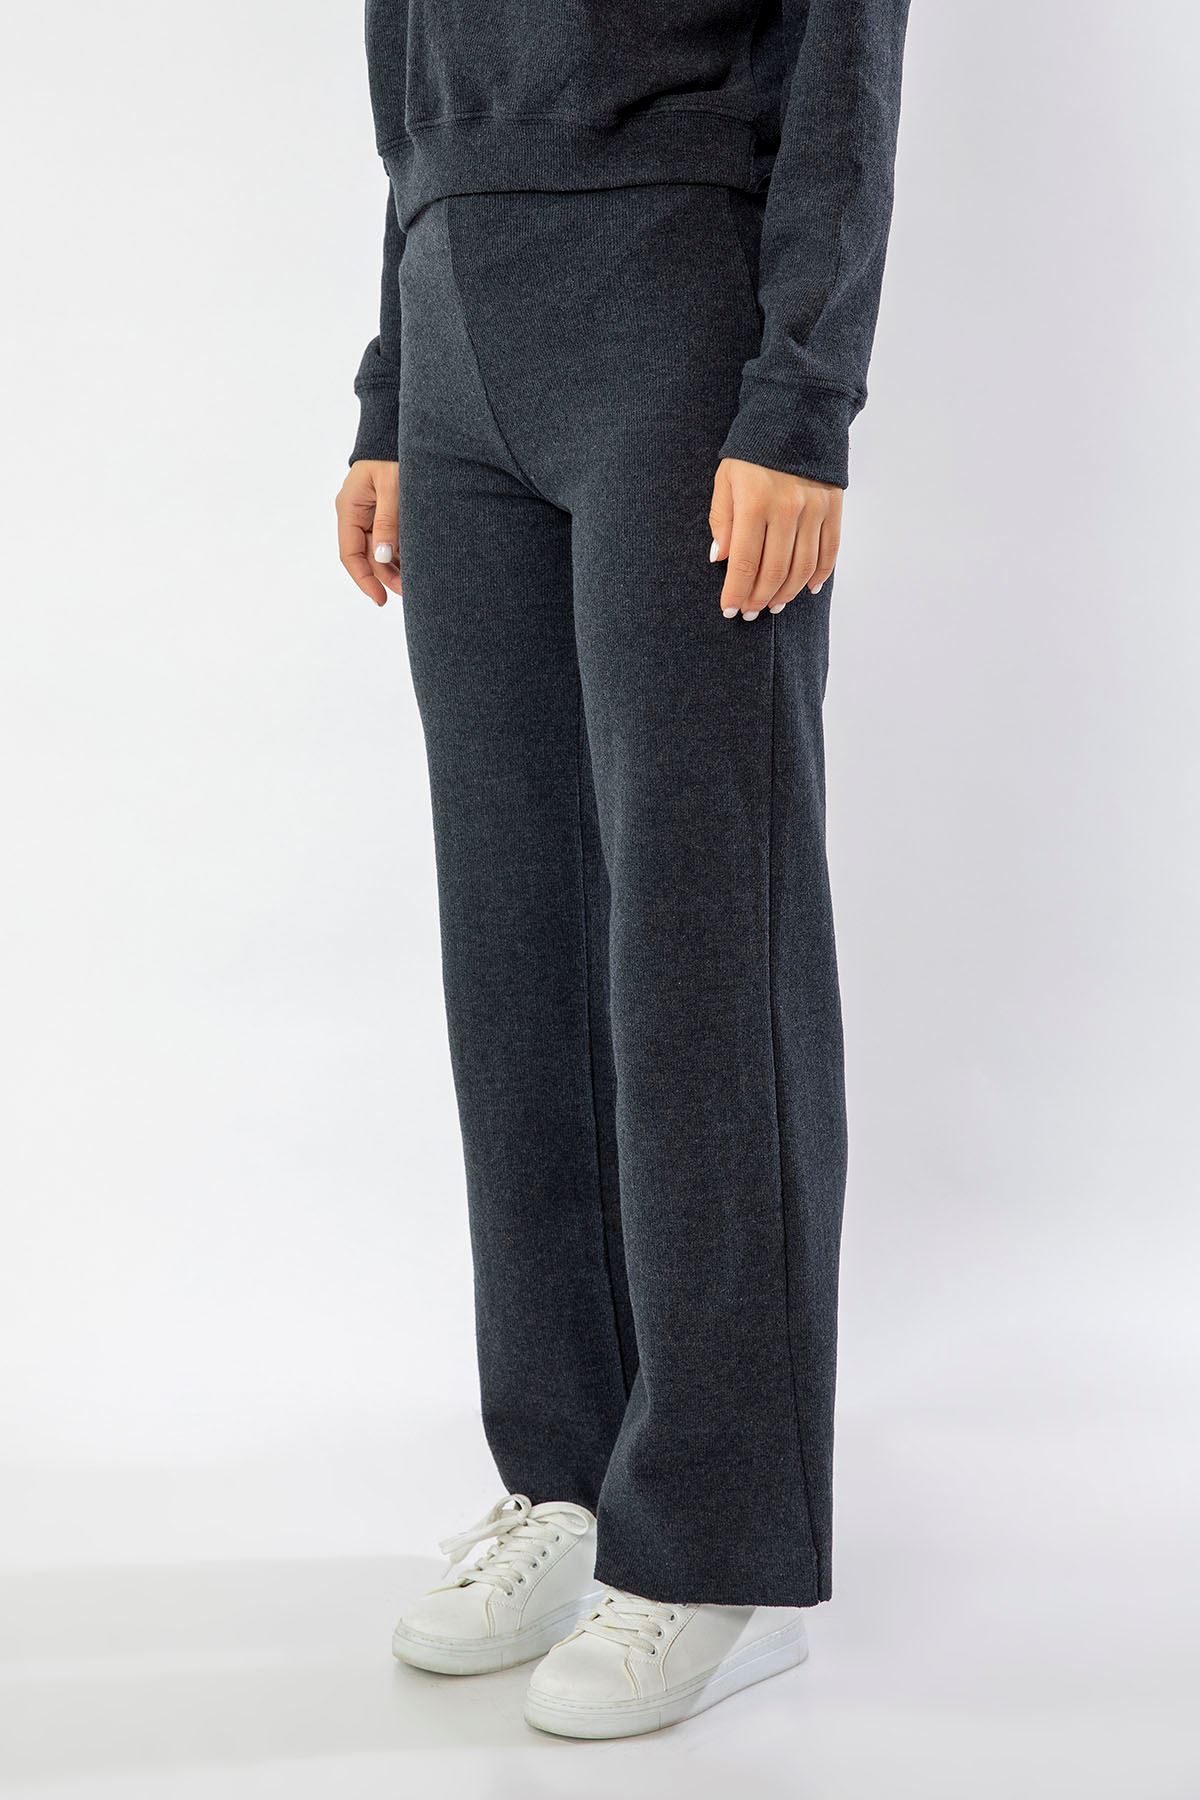 Thessaloniki Knitting Fabric Long Wide Fit Wide Leg Women'S Trouser - Anthracite 